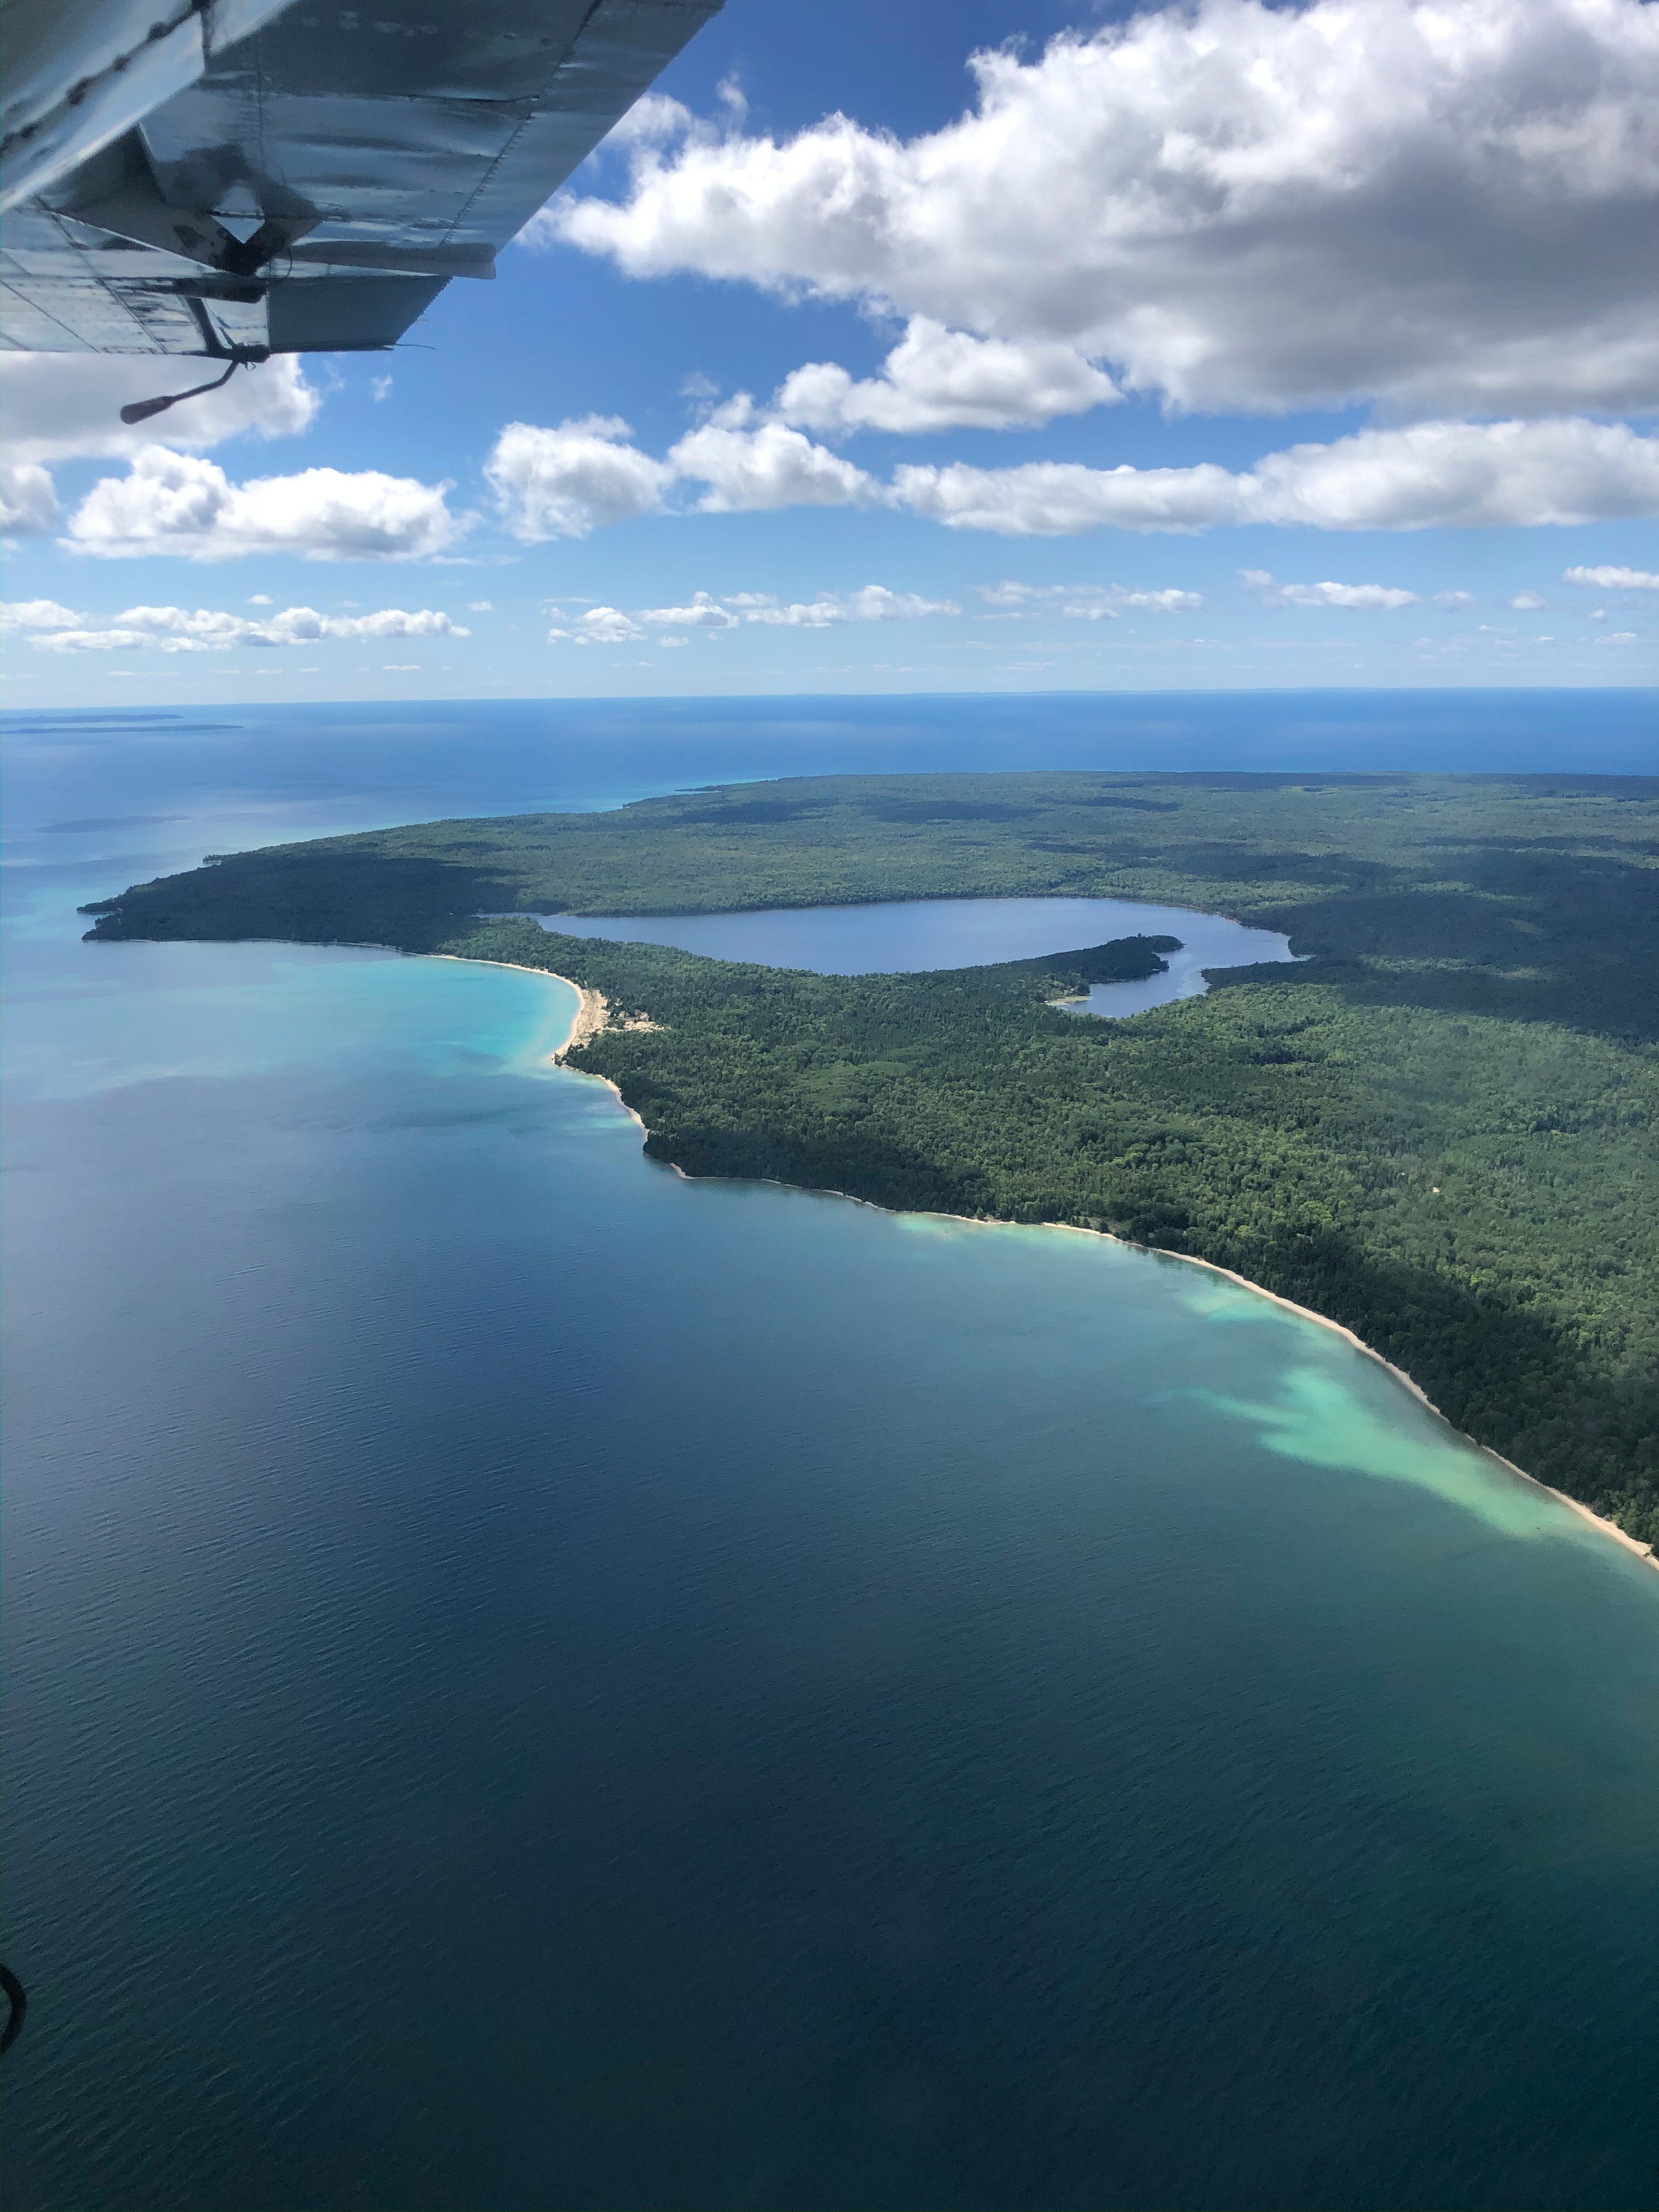 This is the view of Beaver Island from an Island Airways flight, one of two airlines serving island residents and visitors.